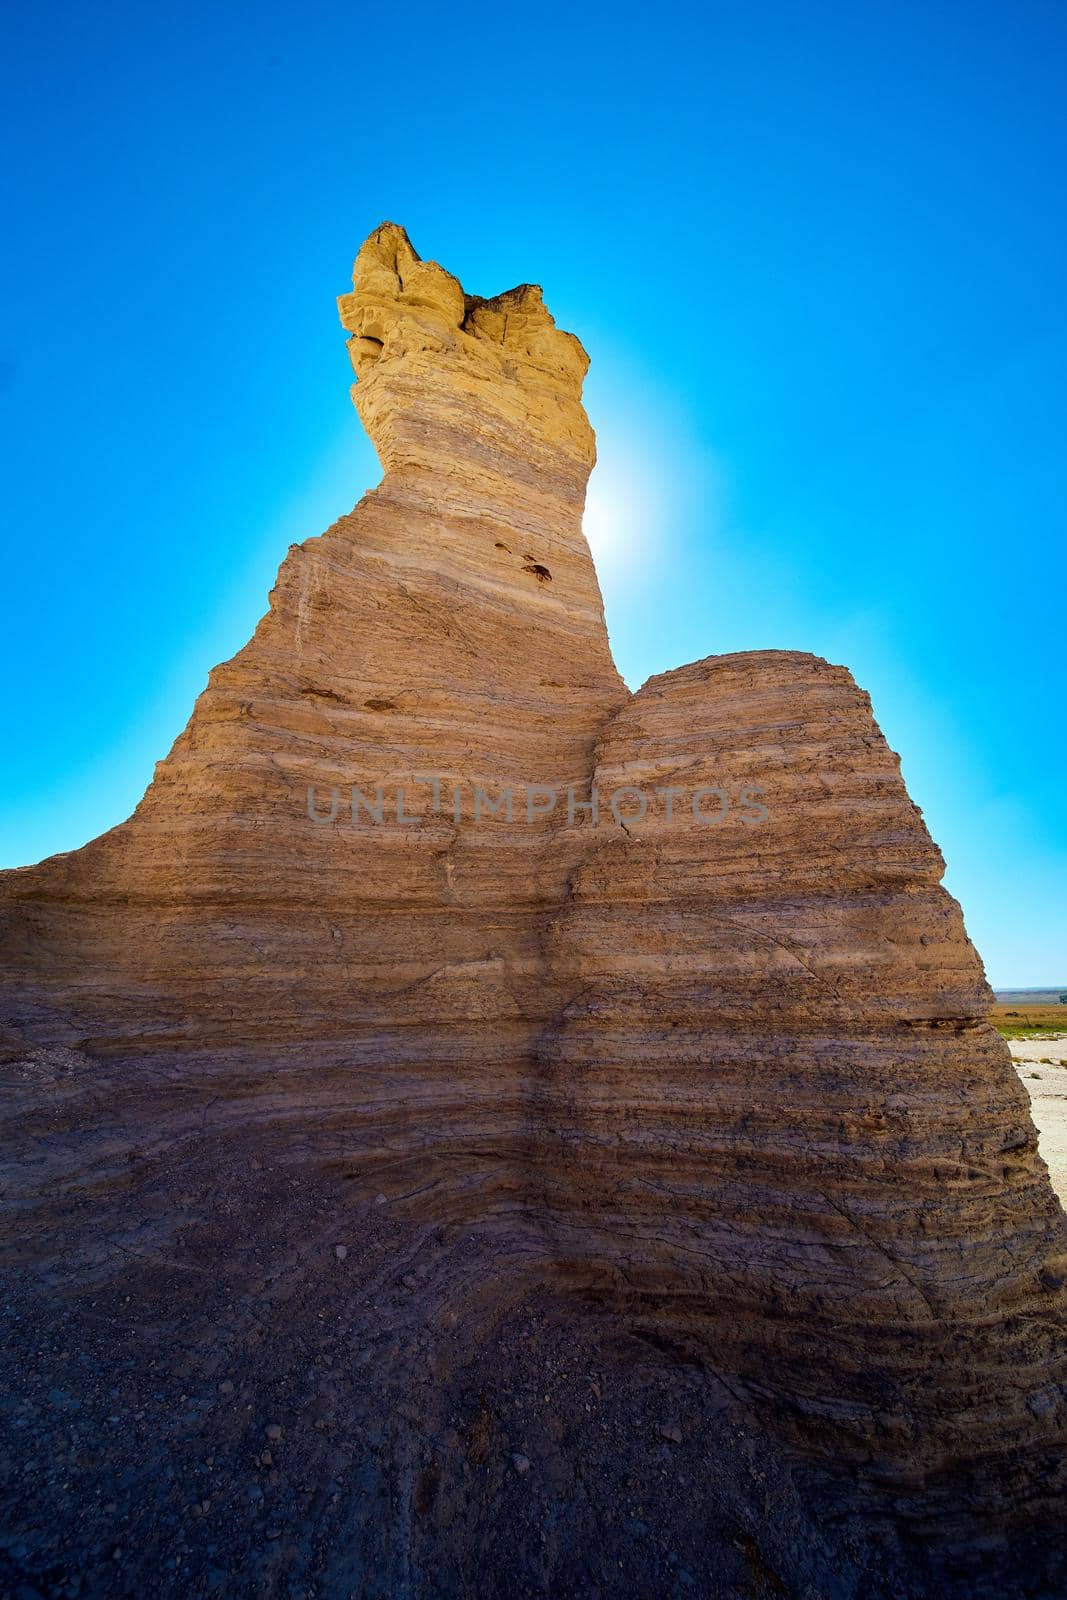 Sun blocked by large pillars of rock in desert by njproductions